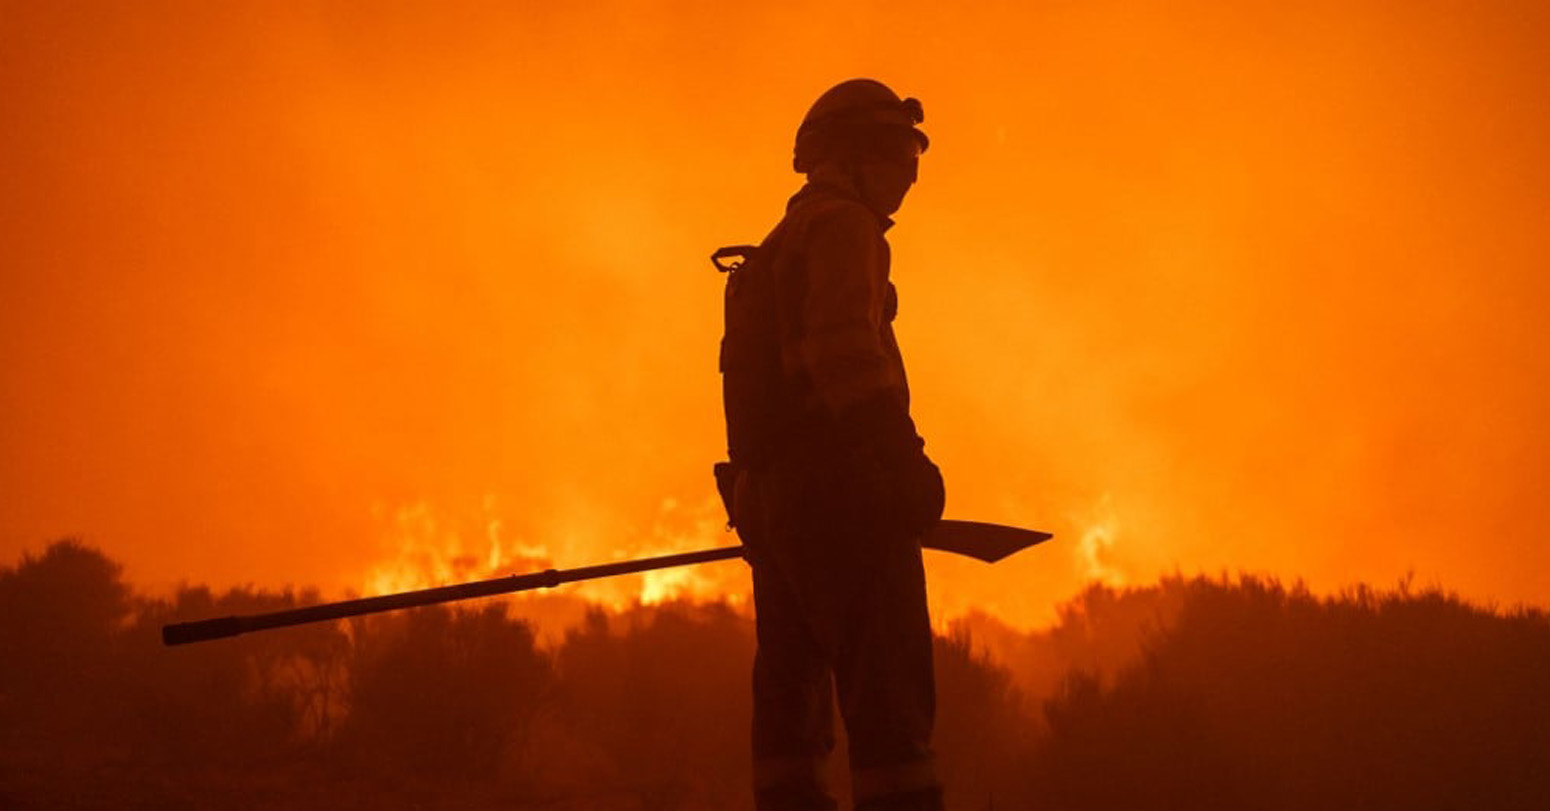 “Future Is Scary”: Firefighters Say As Wildfire Season Ends